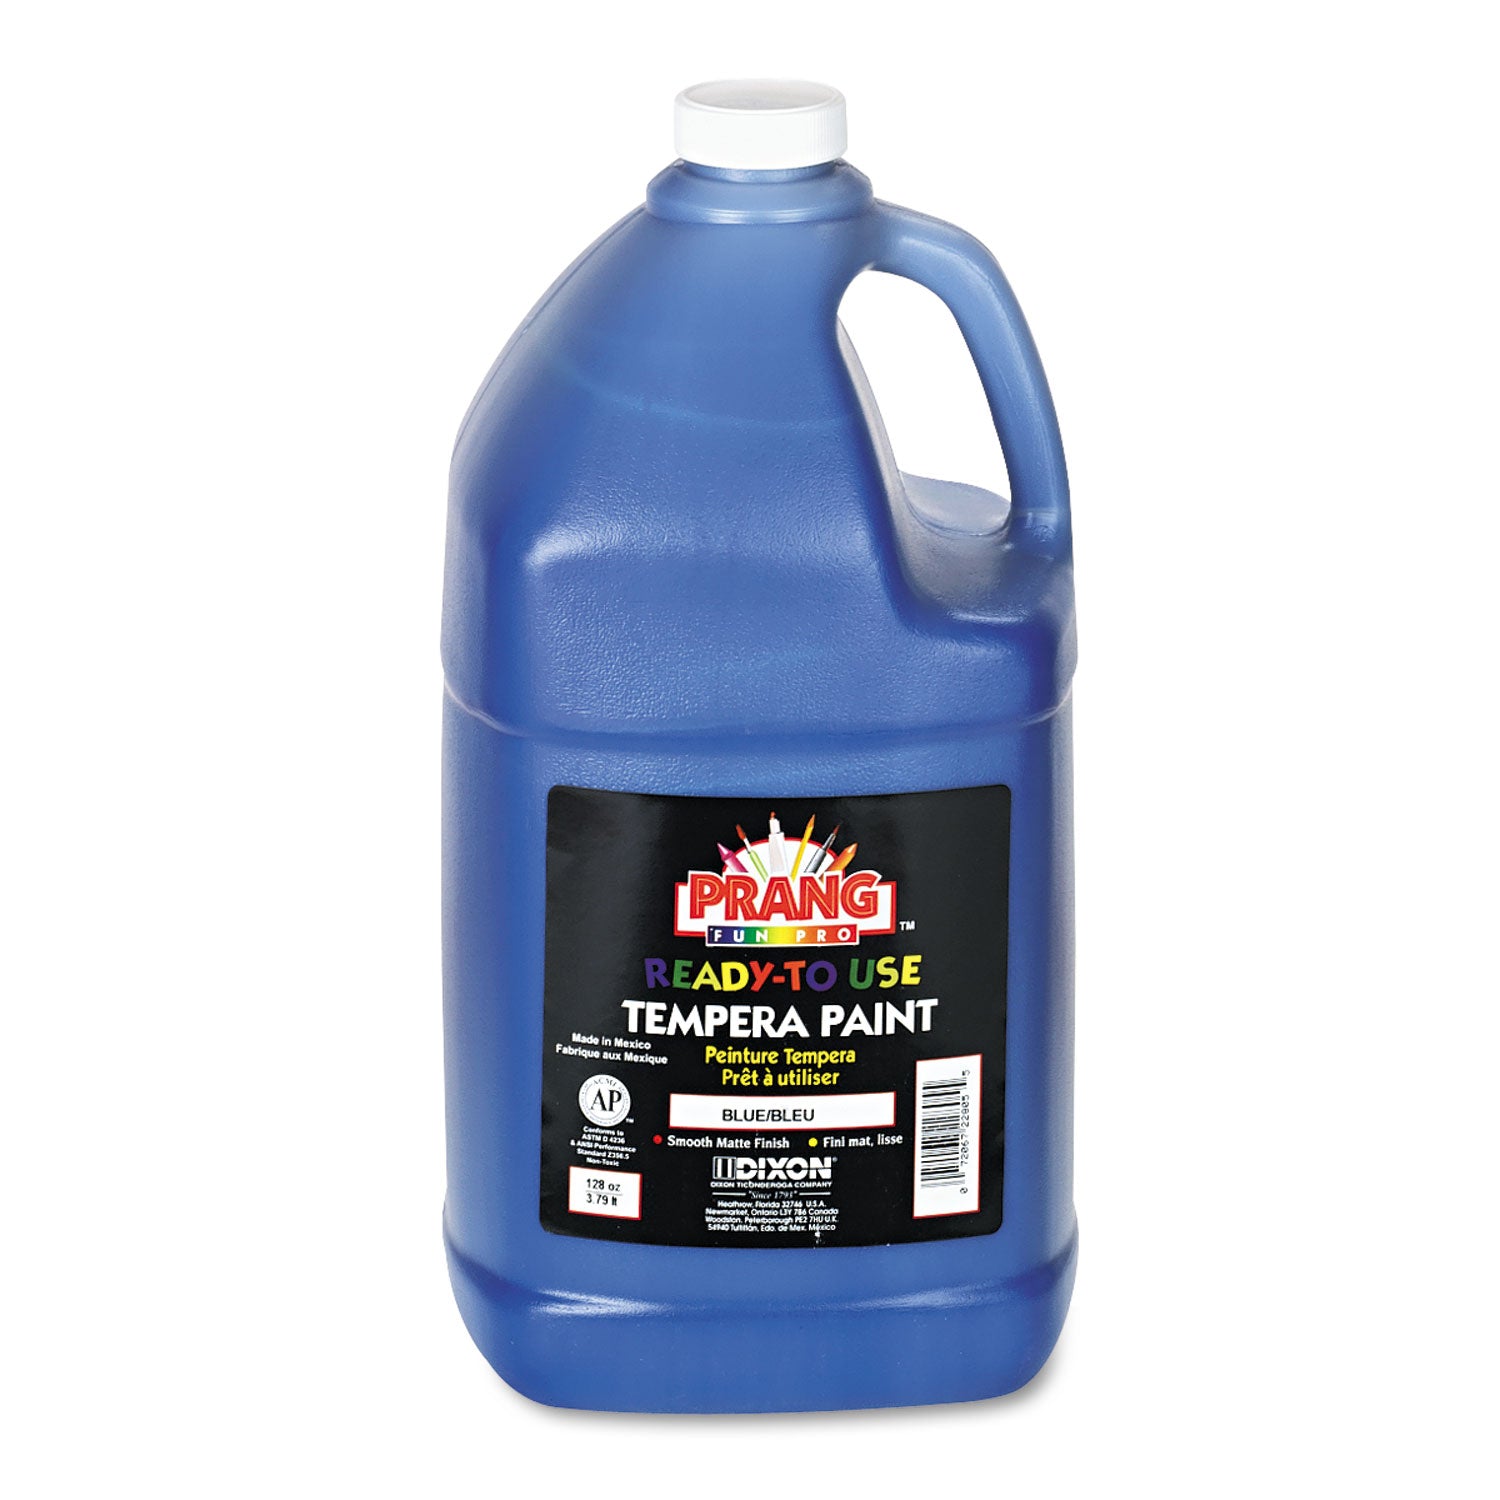 Ready-to-Use Tempera Paint, Blue, 1 gal Bottle - 